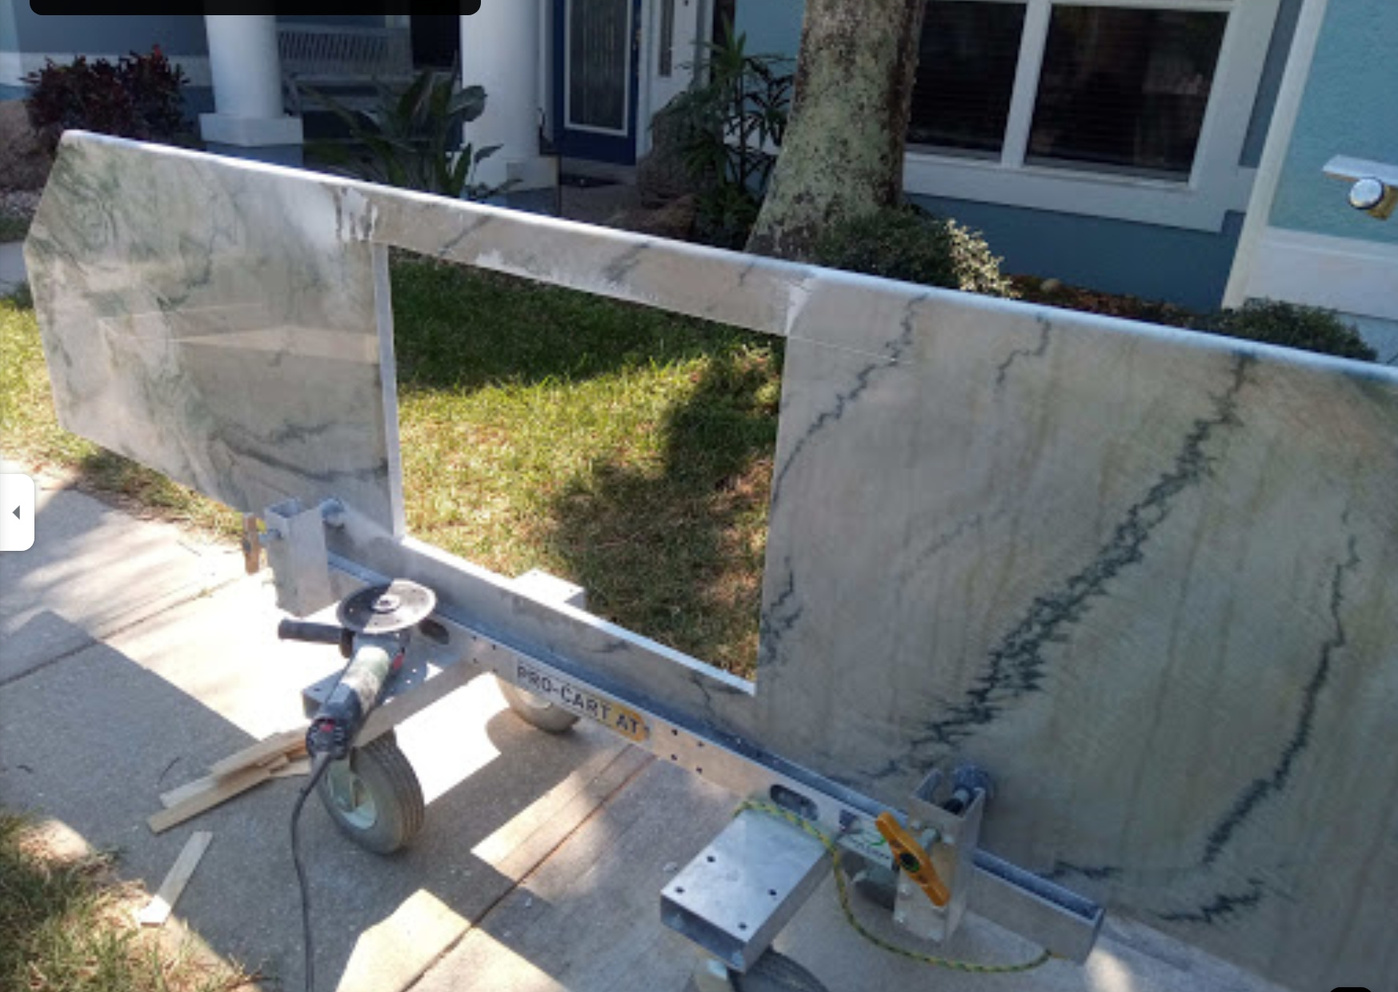 a person is working on a marble countertop in front of a house